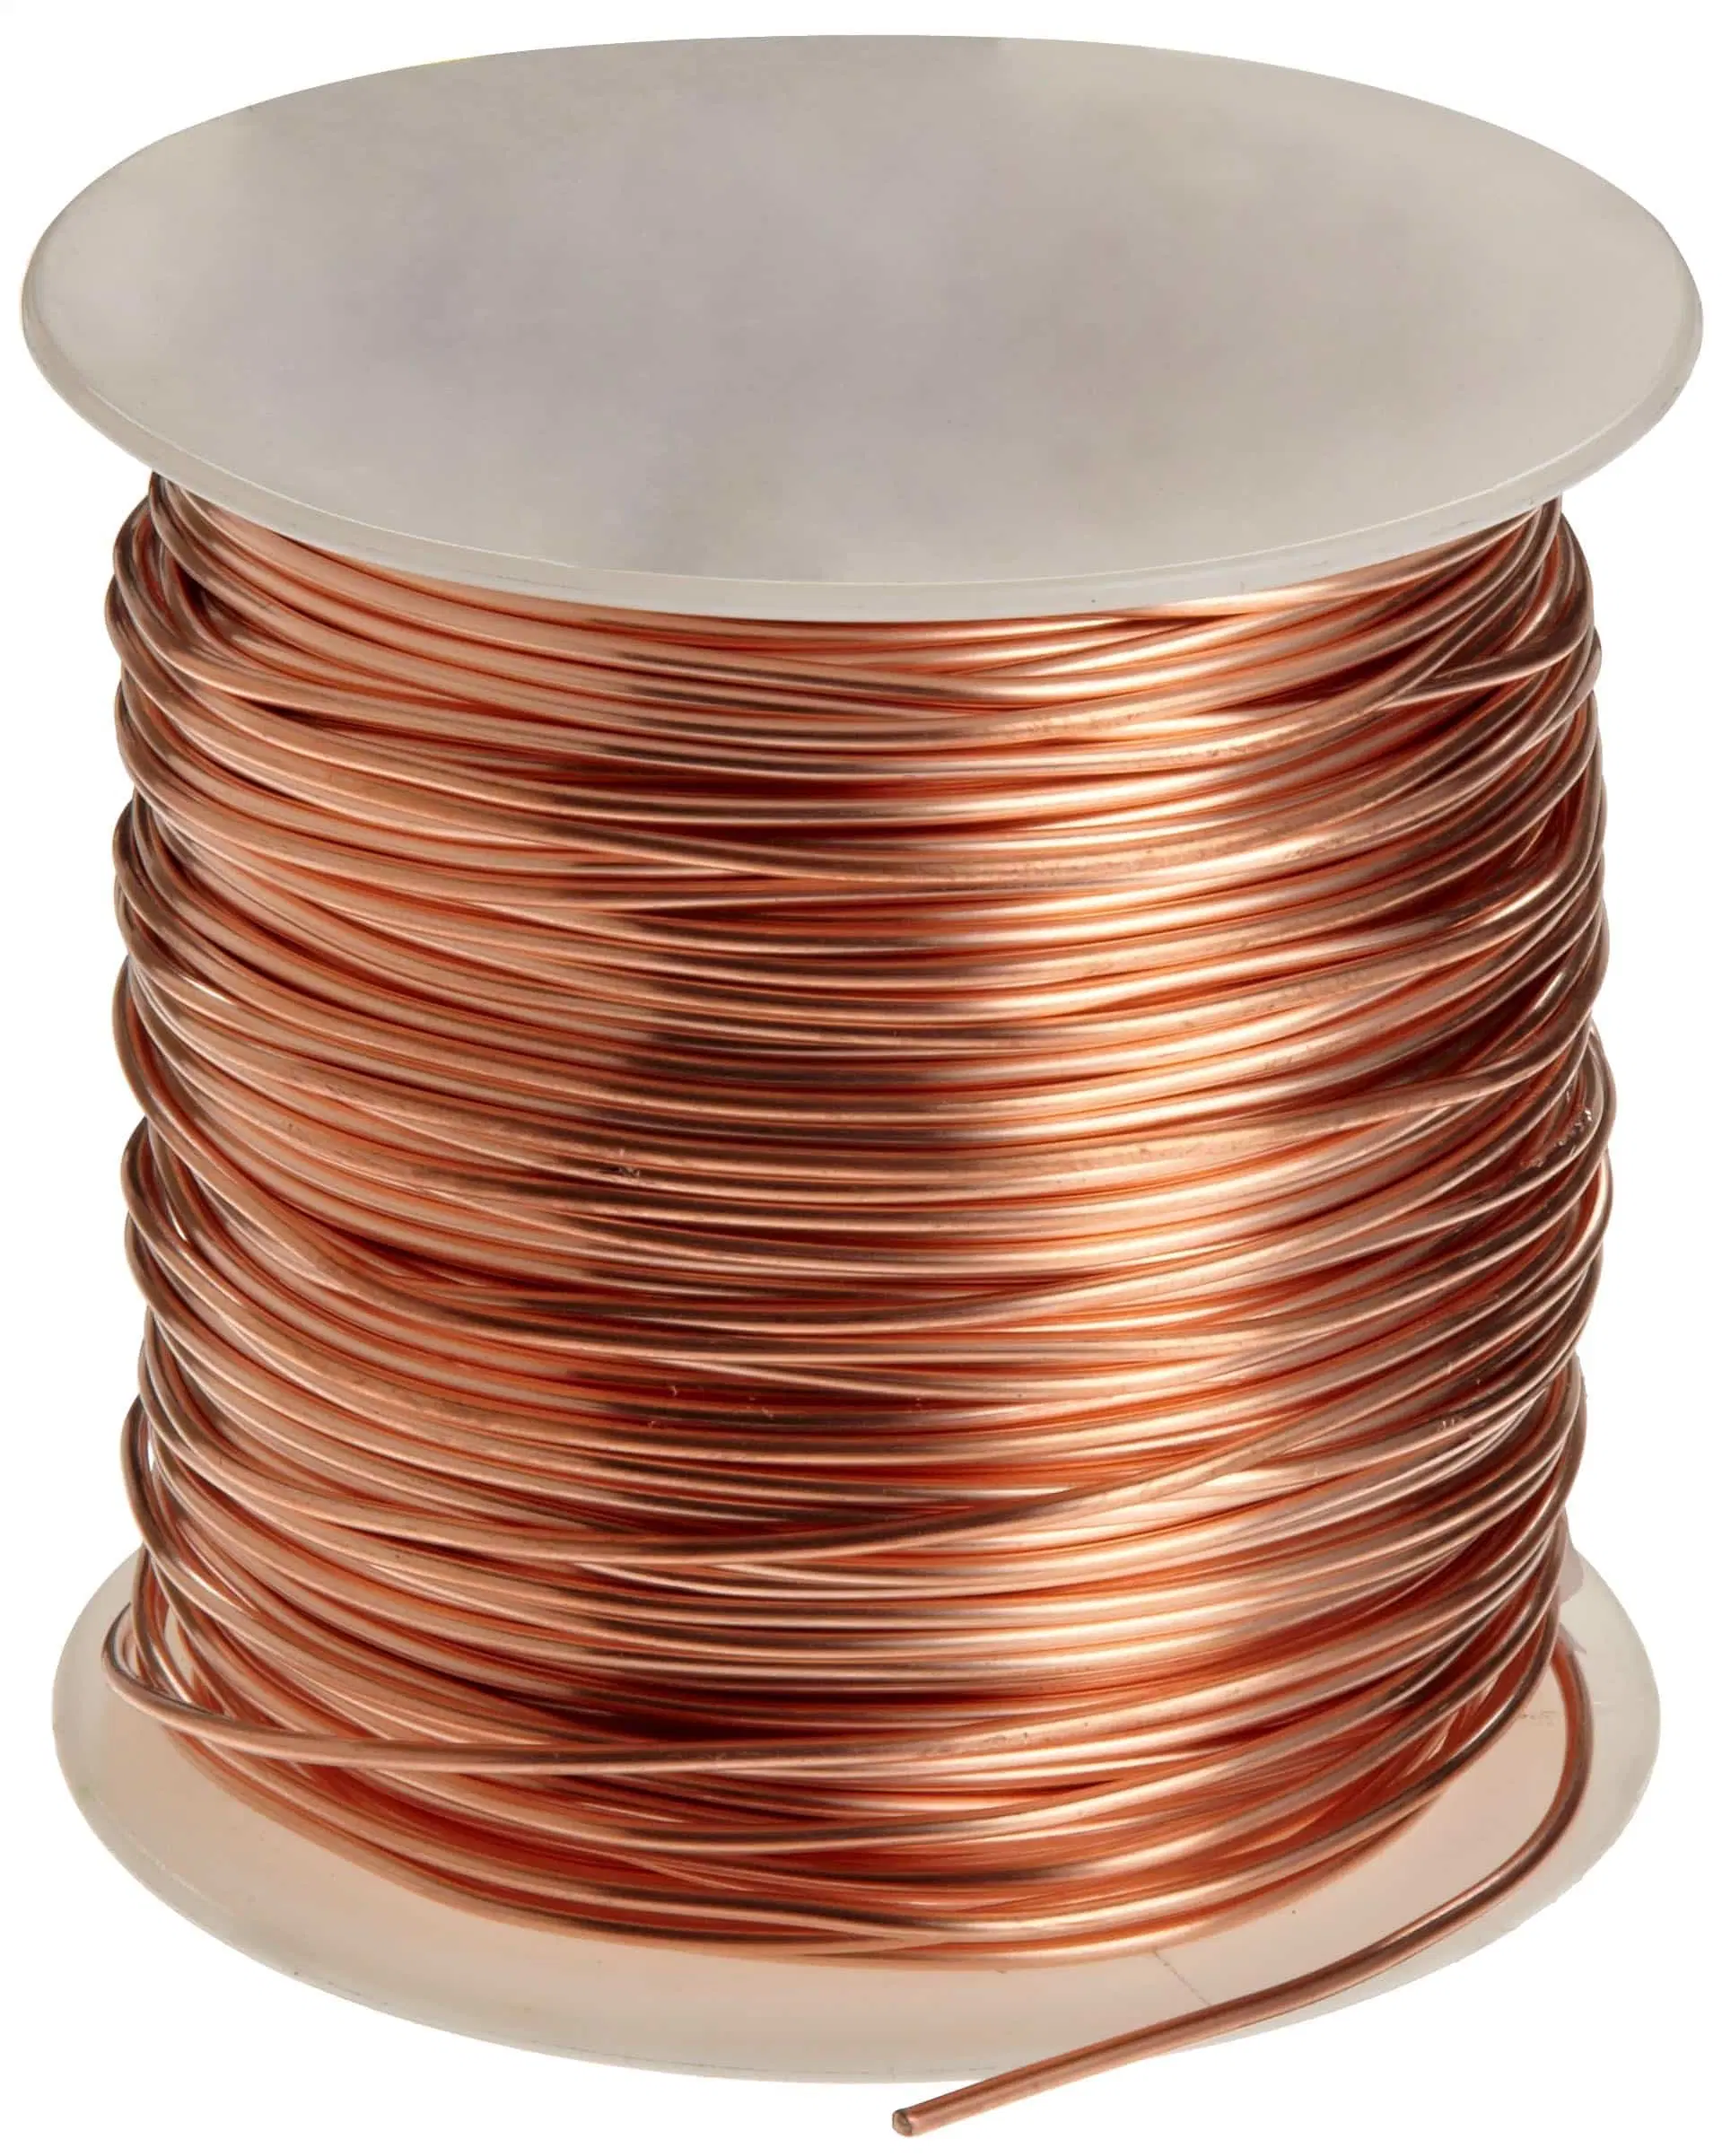 99.95% Copper Wire 0.8mm 1.0mm 1.2mm 1.6mm Magnet Winding Rewinging Er70s-6 Mild Steel Carbon Steel Welding Wire Copper Coated Electrical Copper Wire